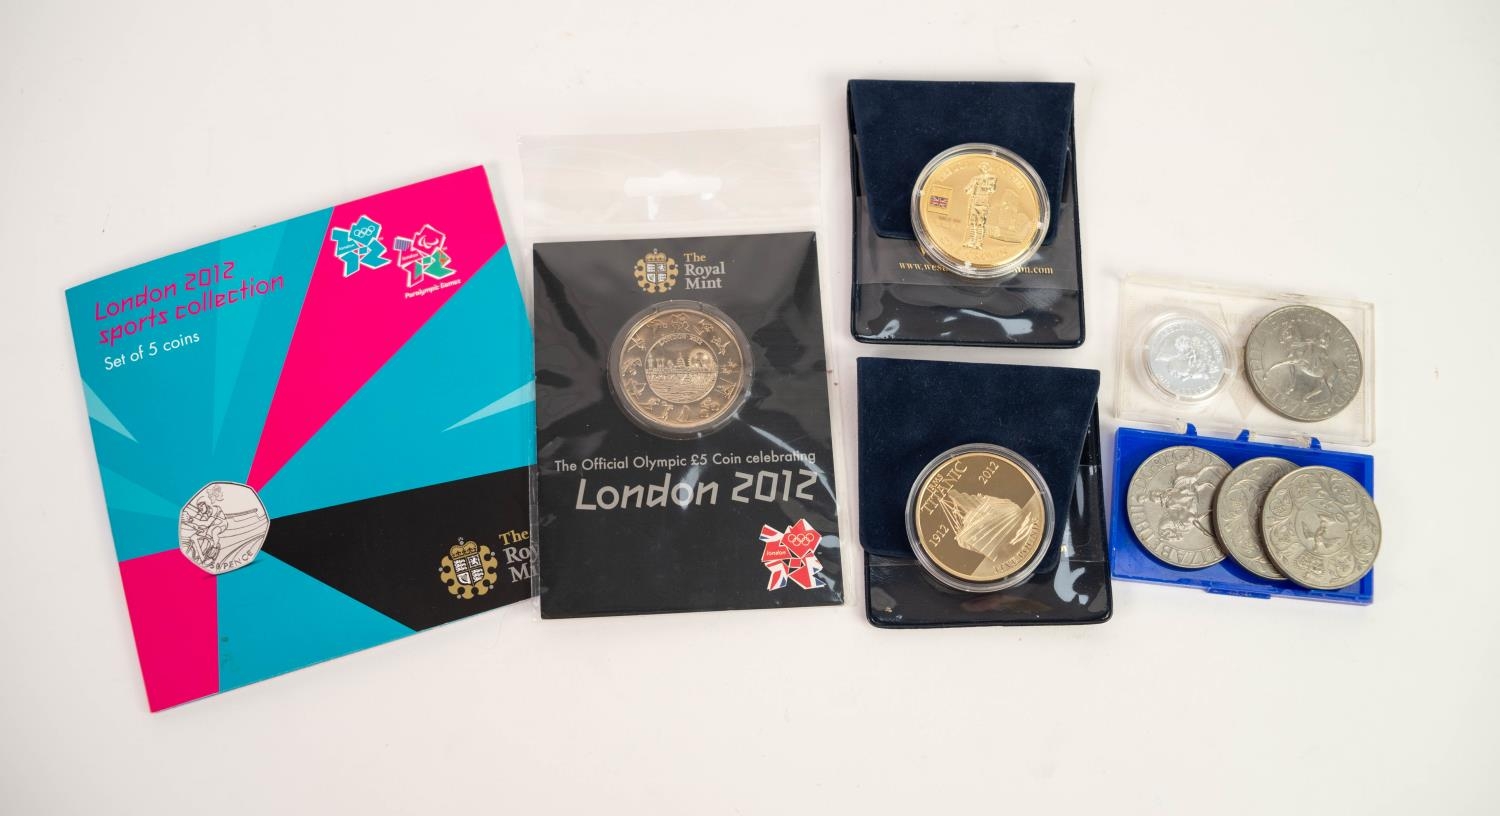 FOUR ELIZABETH II 1977 CROWN COINS, two ROYAL MINT £5 COINS, LONDON 2012 OLYMPICS, TWO OTHER £5